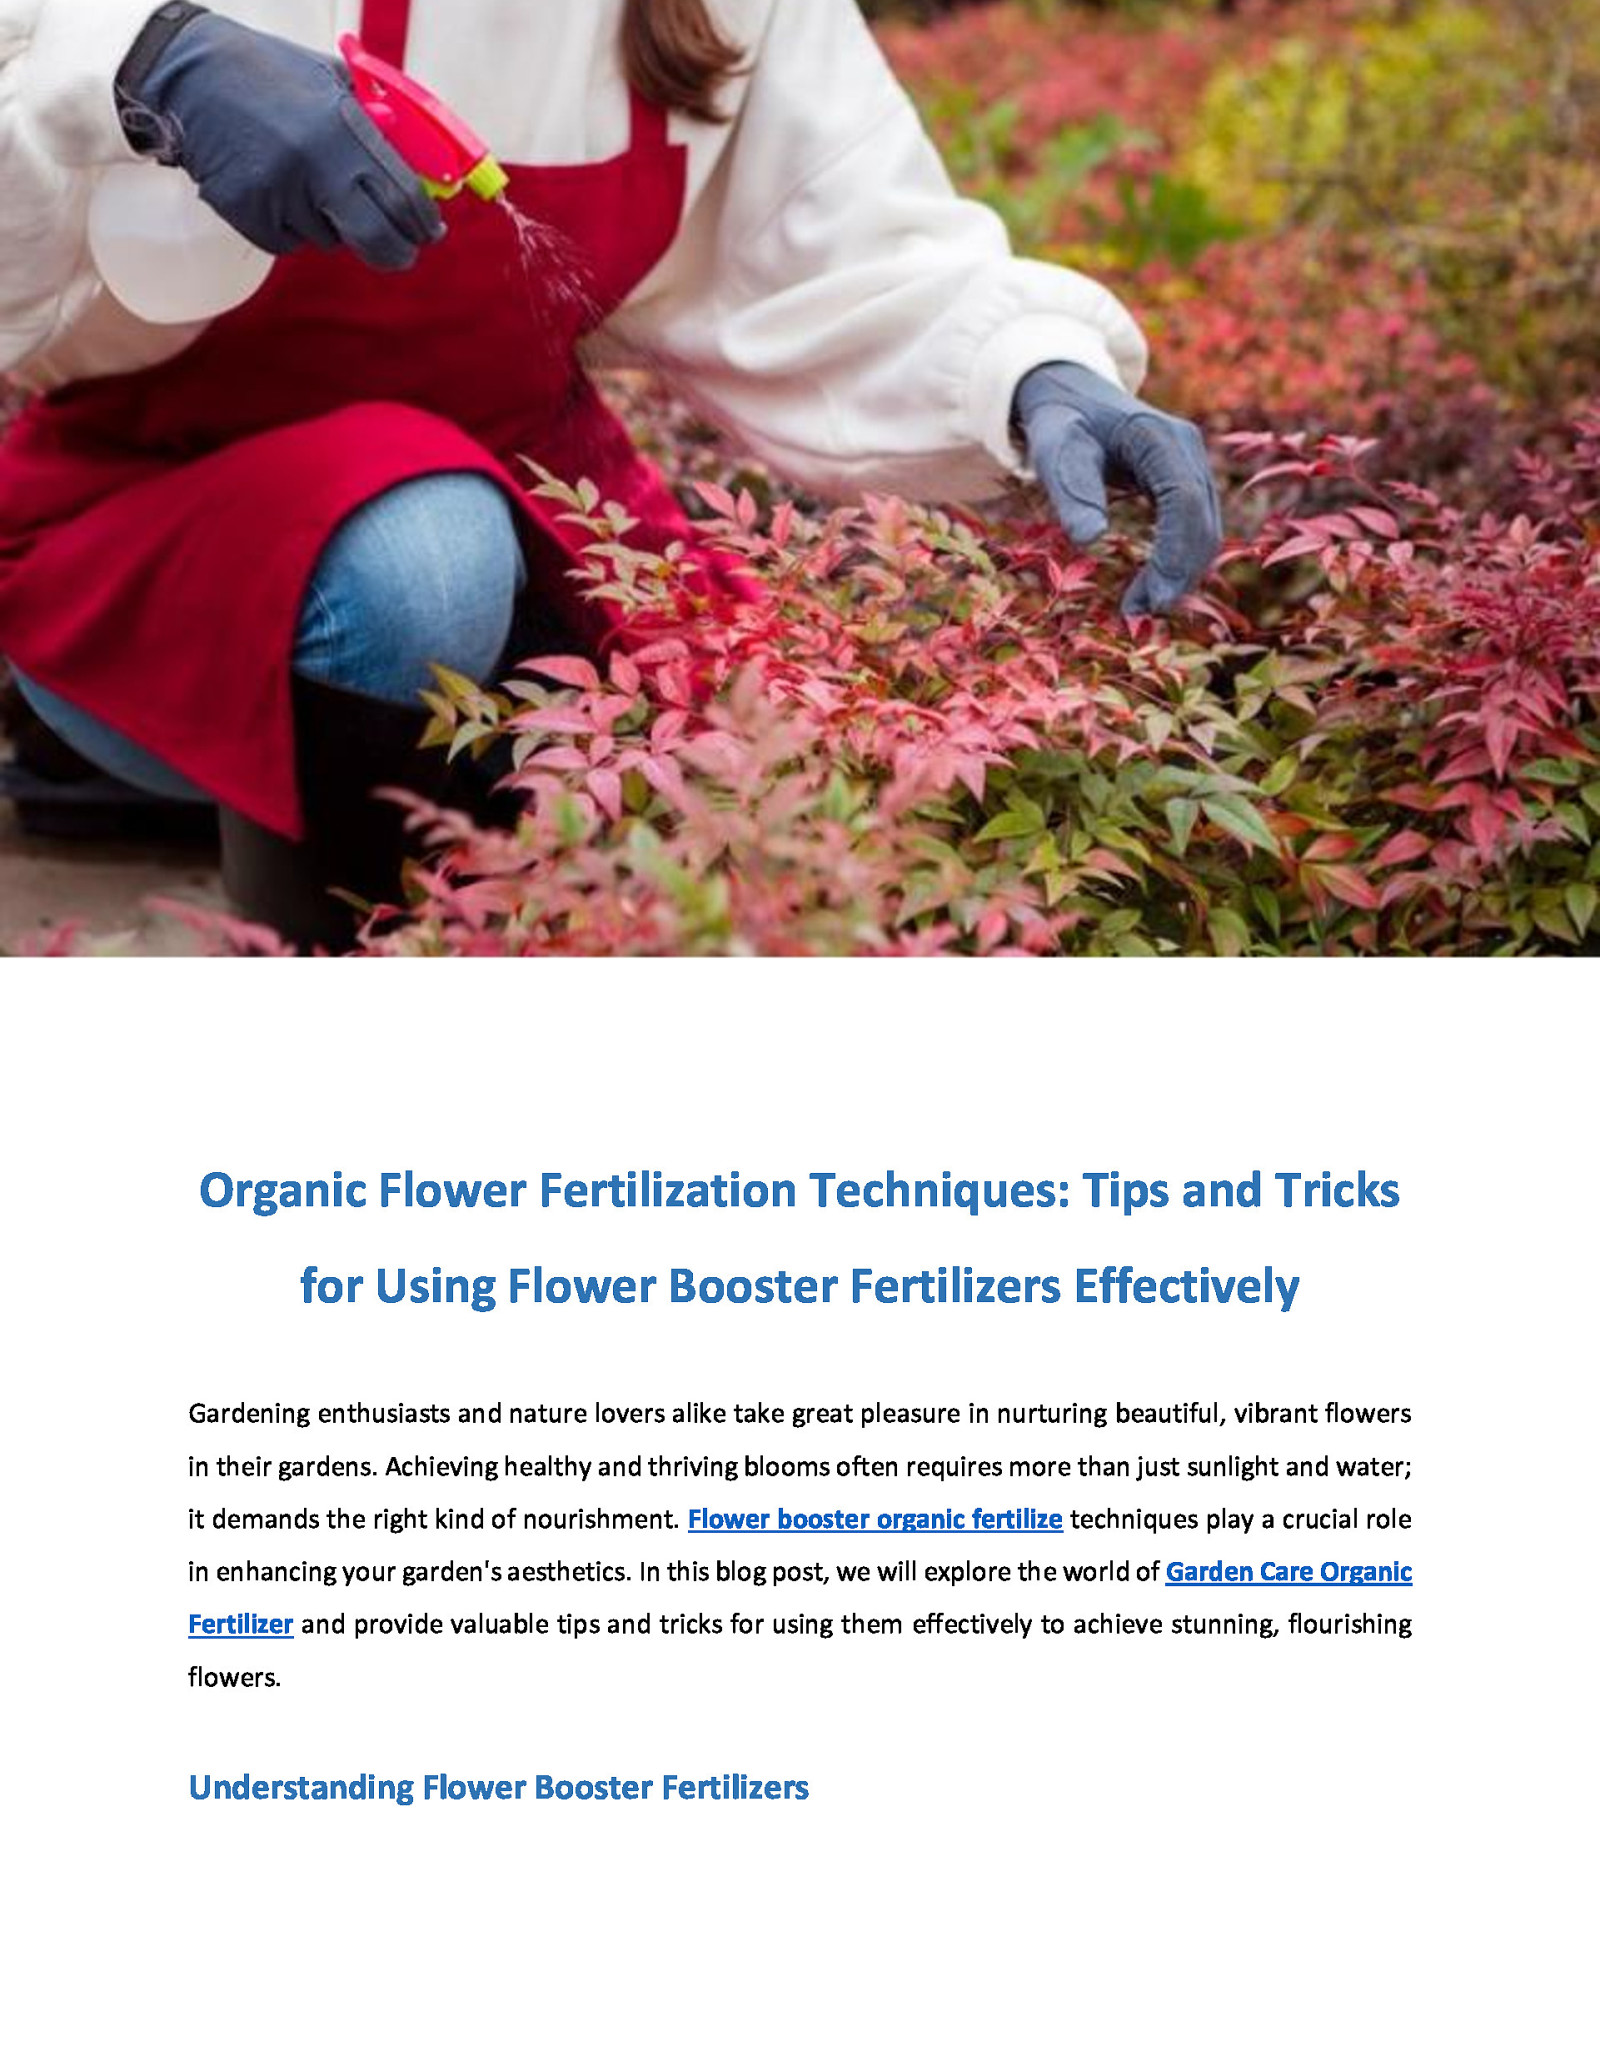 Organic Flower Fertilization Techniques: Tips and Tricks for Using Flower Booster Fertilizers Effectively